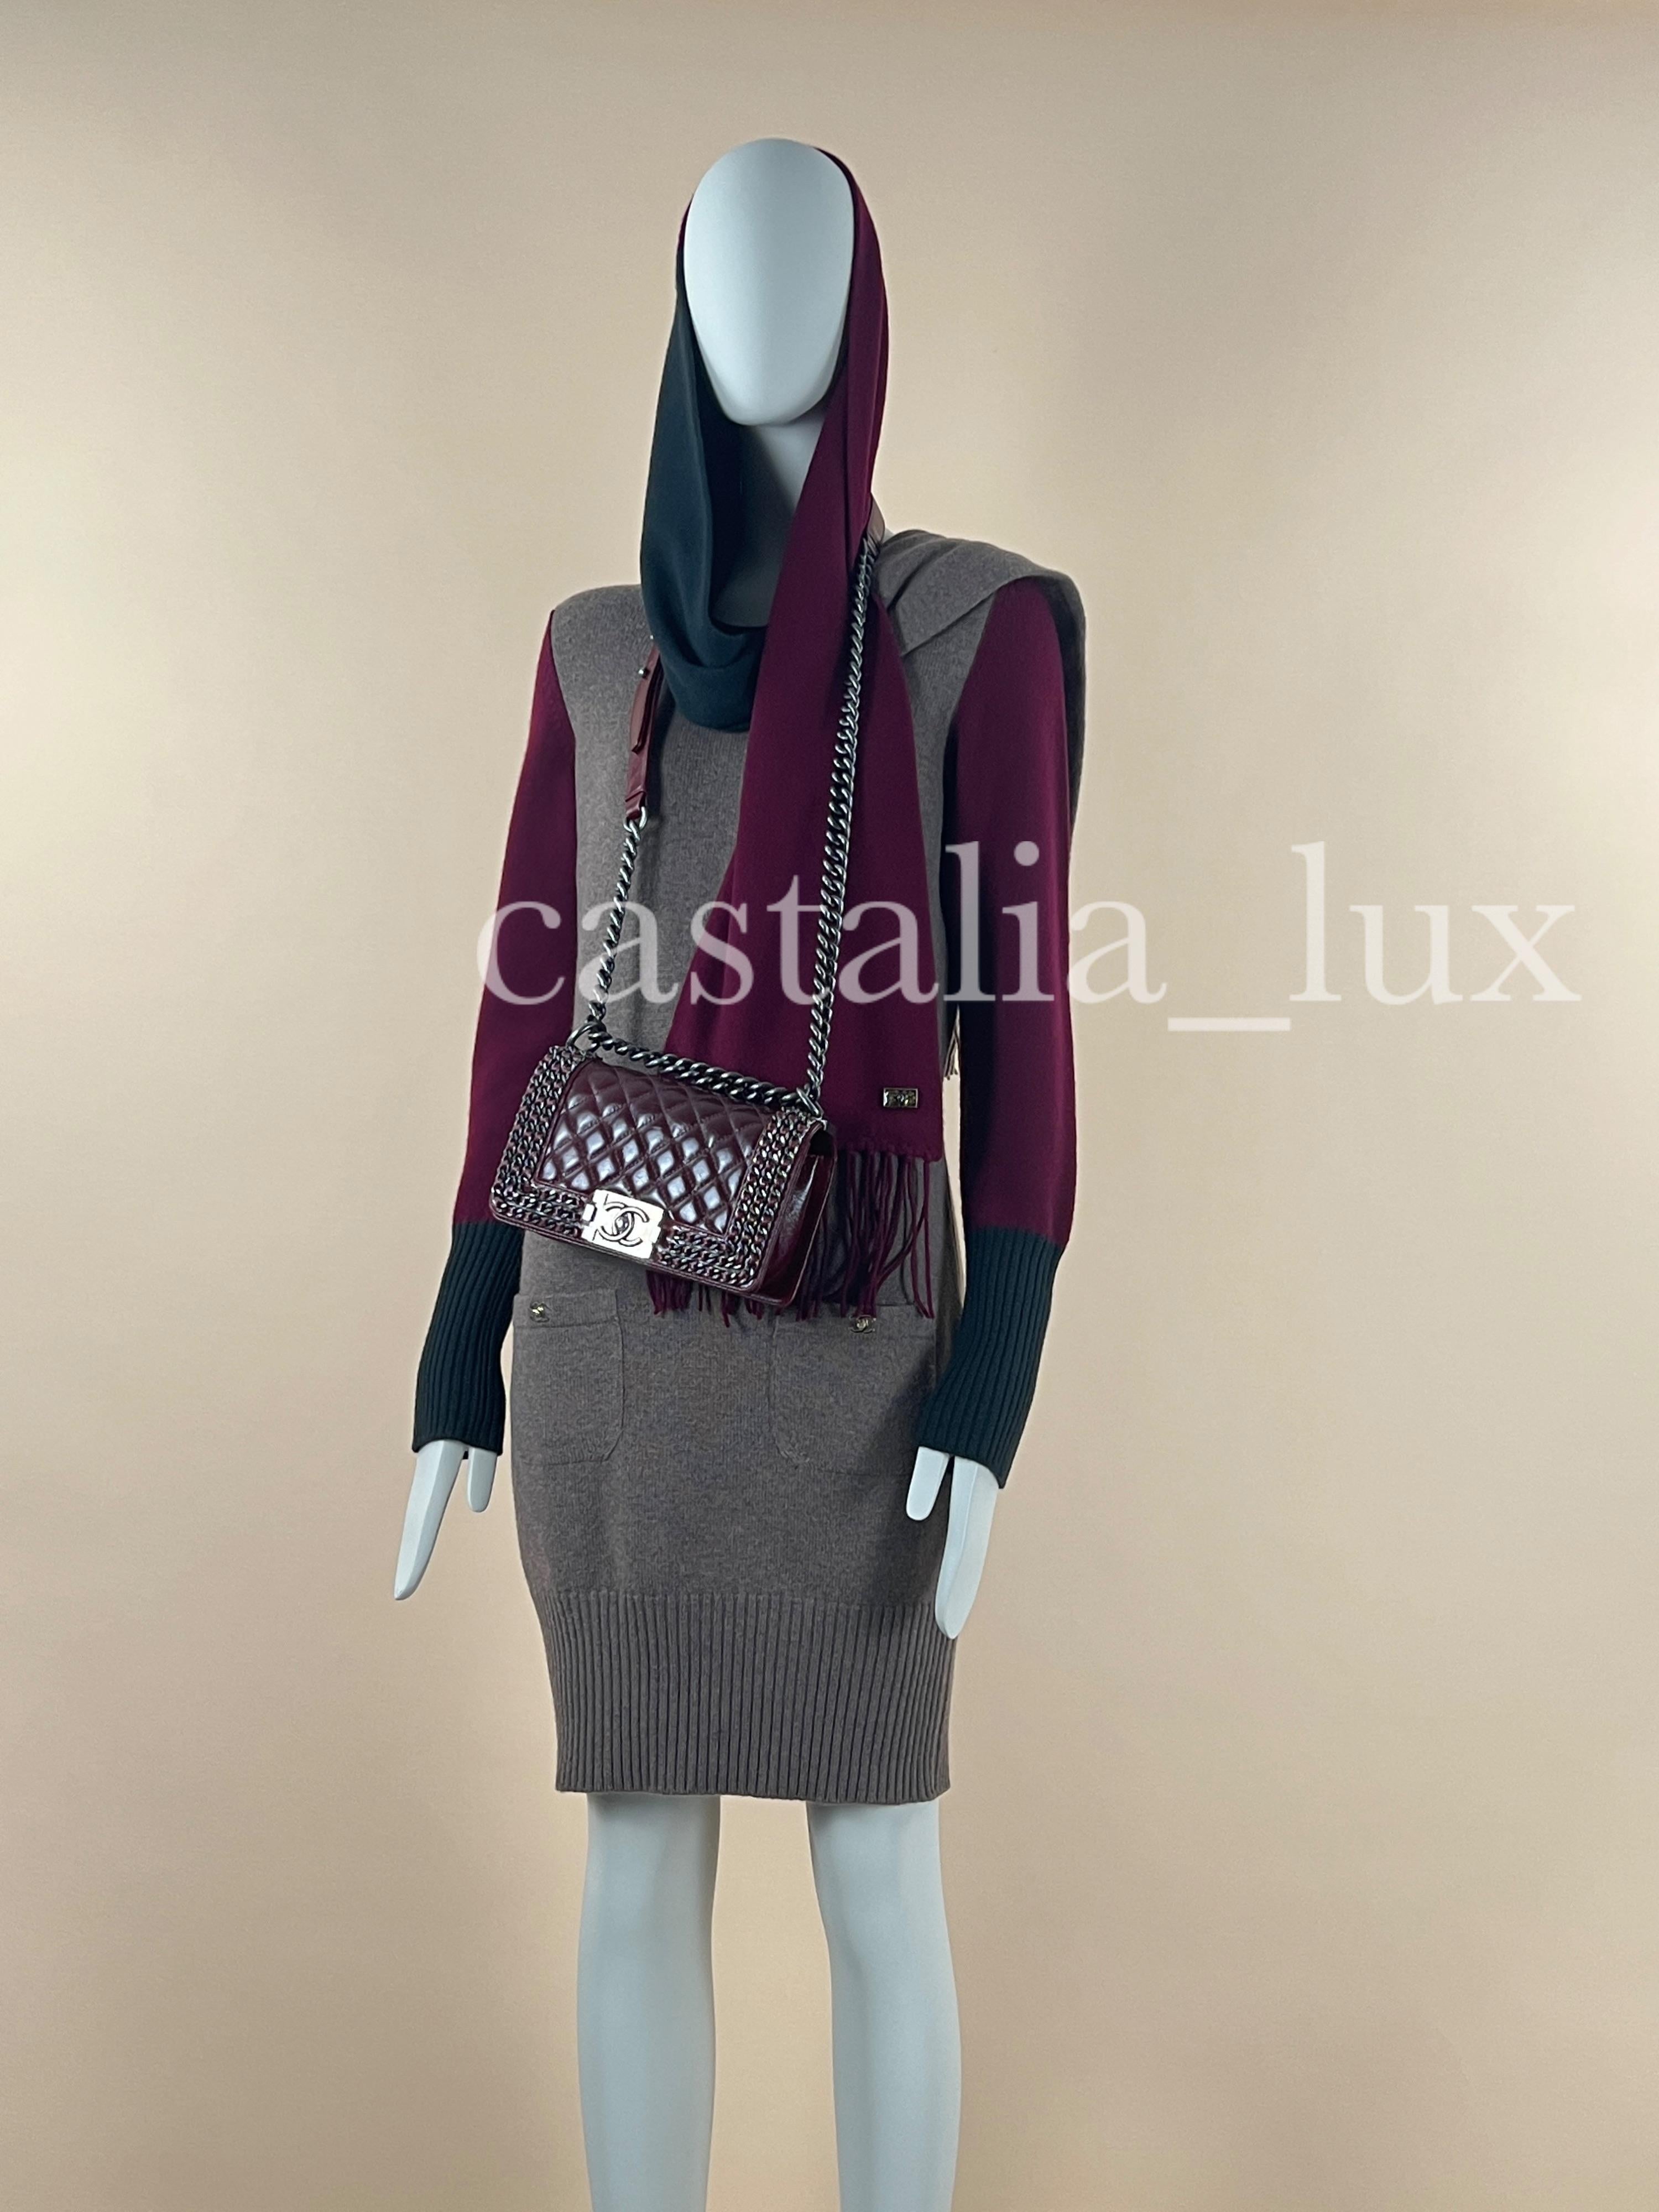 New Chanel cashmere set - dress with CC turnlocks at pockets and large wrap scarf with CC logo charm.
- made of pure 100% cashmere in beige, burgundy and emerald colour
Size mark 36 fr.
Condition: Never worn.